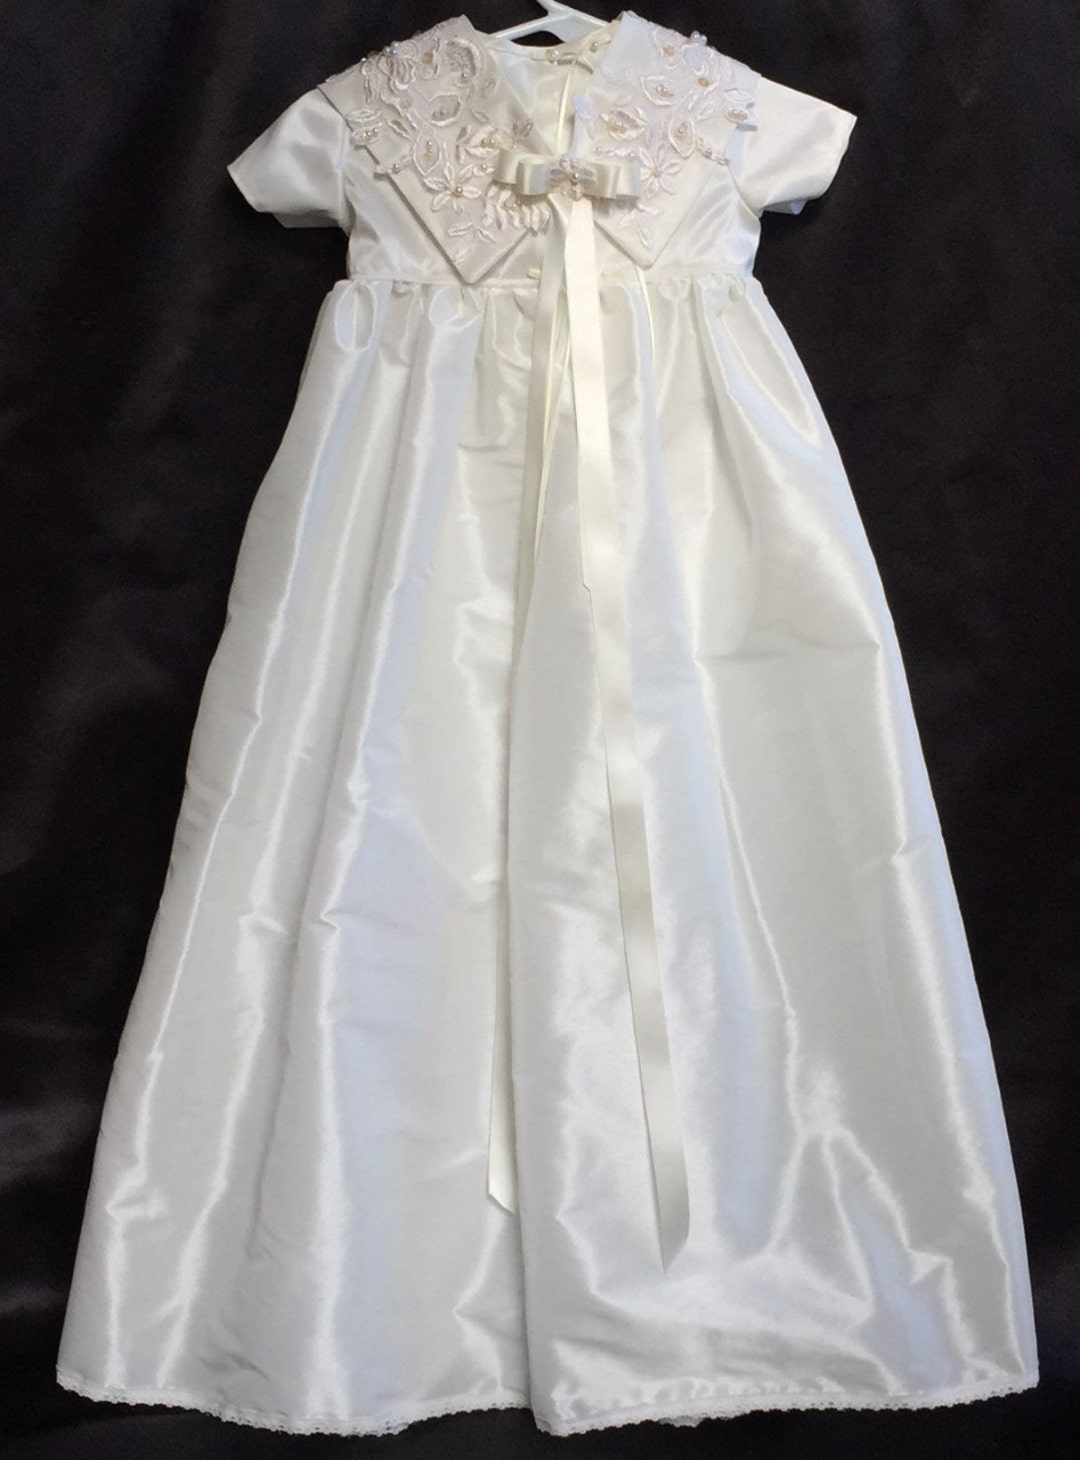 Gender Neutral Christening Gown Made to Order From Your Wedding Dress ...